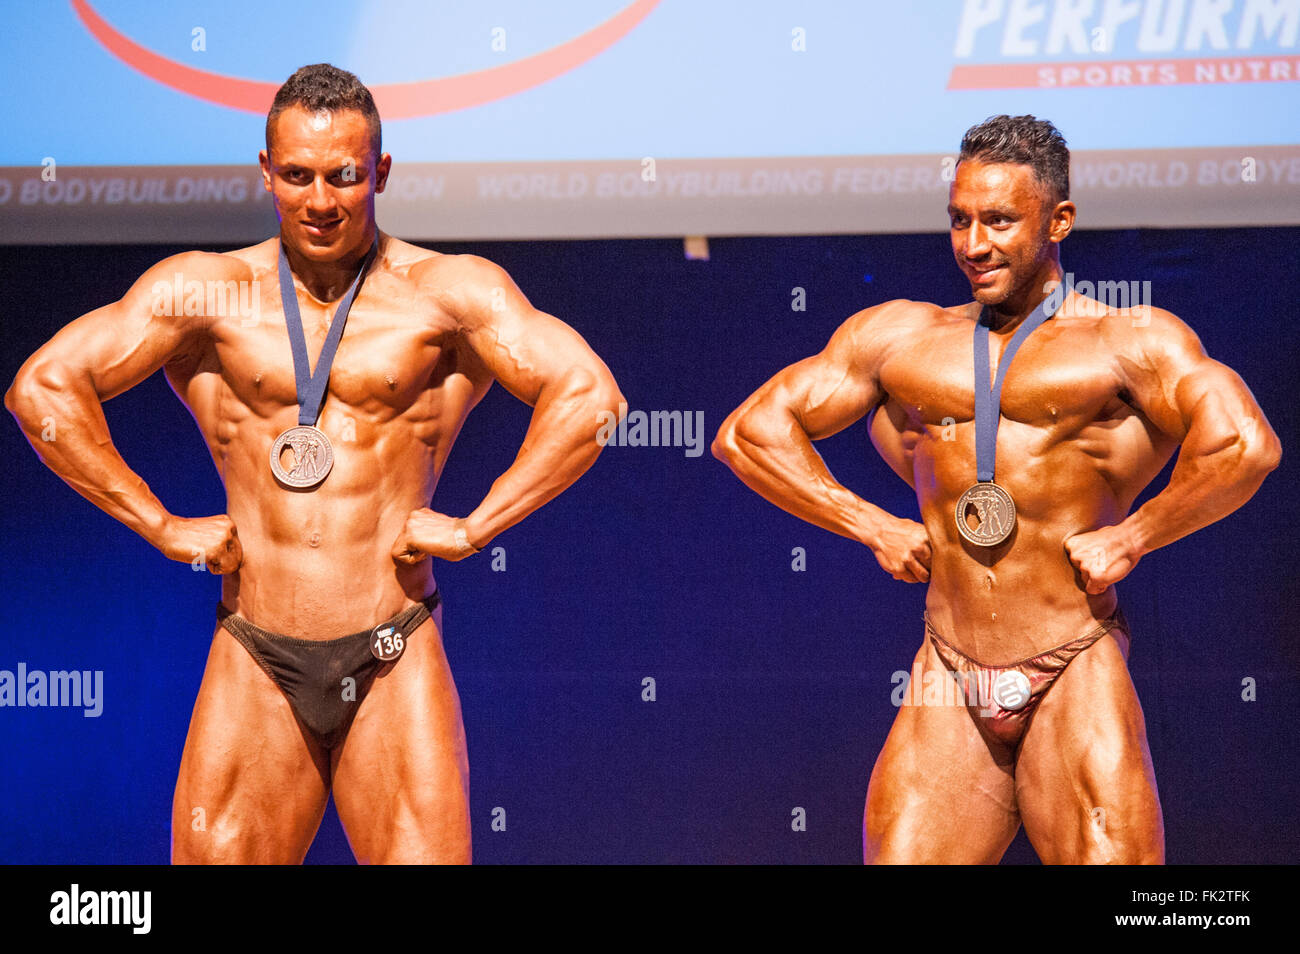 MAASTRICHT, THE NETHERLANDS - OCTOBER 25, 2015: Male bodybuilders celebrate their championship victory on stage Stock Photo